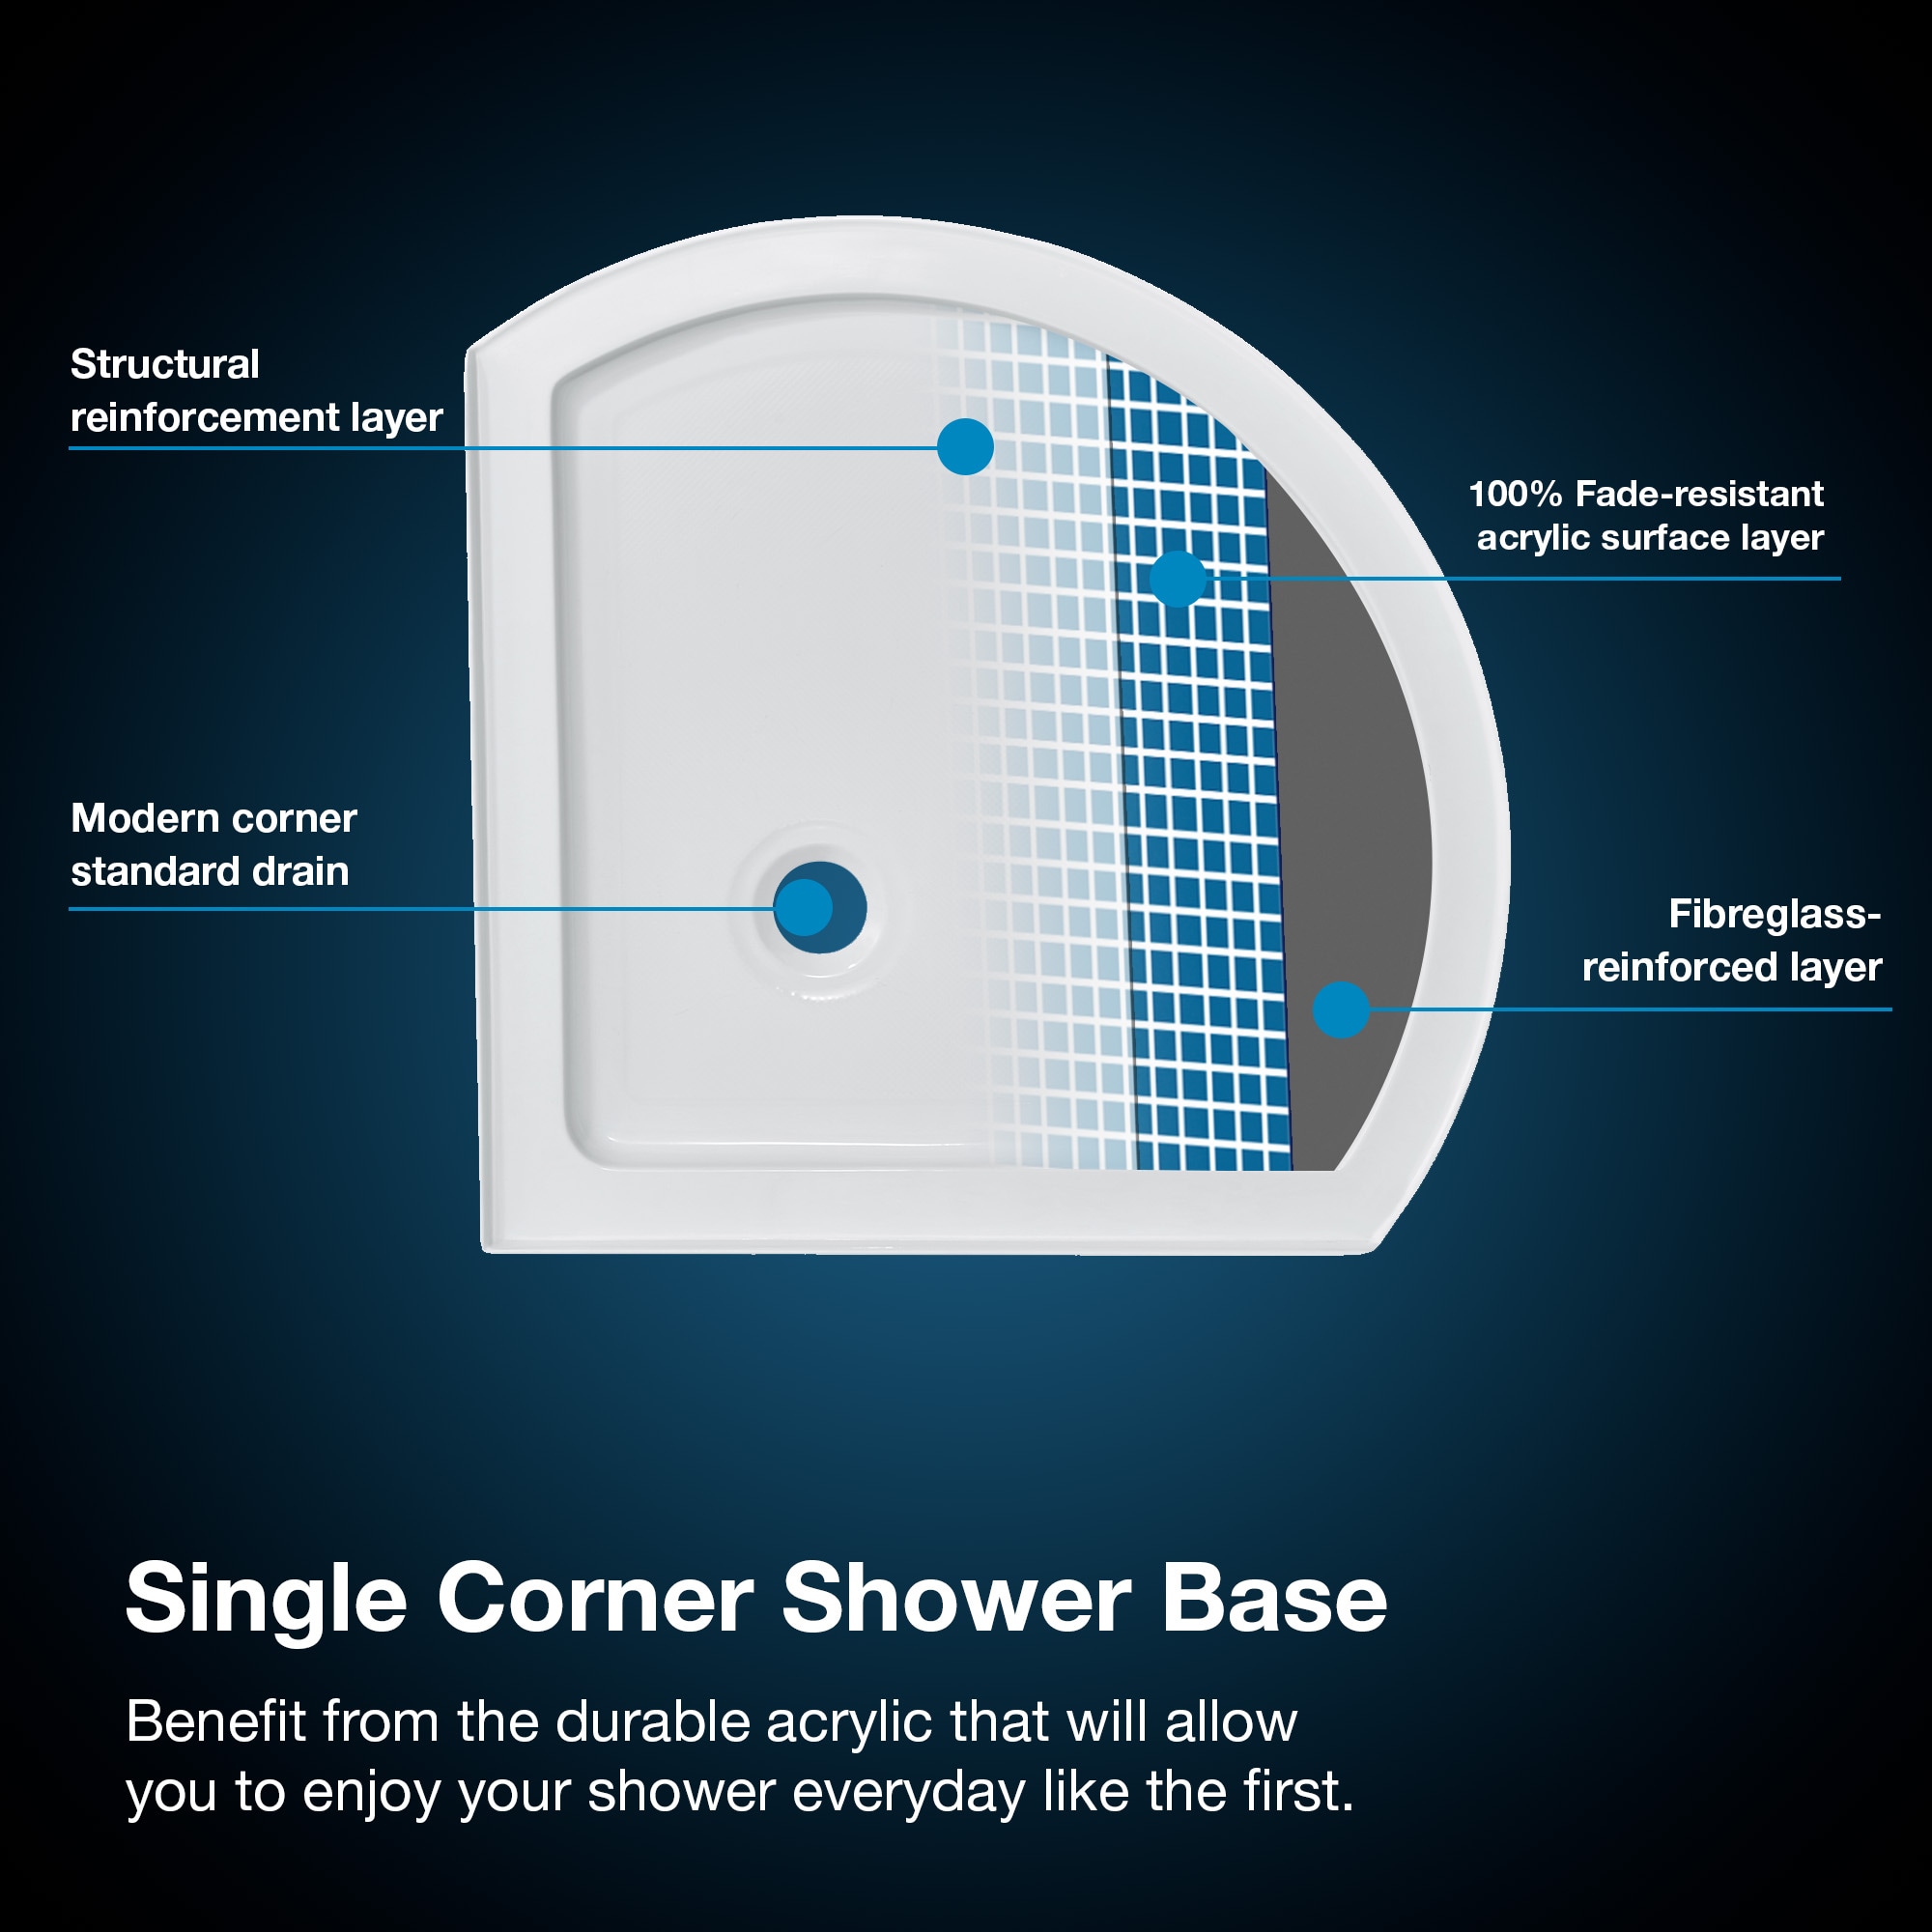 Breeze 32 in. L x 32 in. W x 76.97 in. H Corner Shower Kit with Clear  Framed Sliding Door in Satin Nickel and Shower Pan